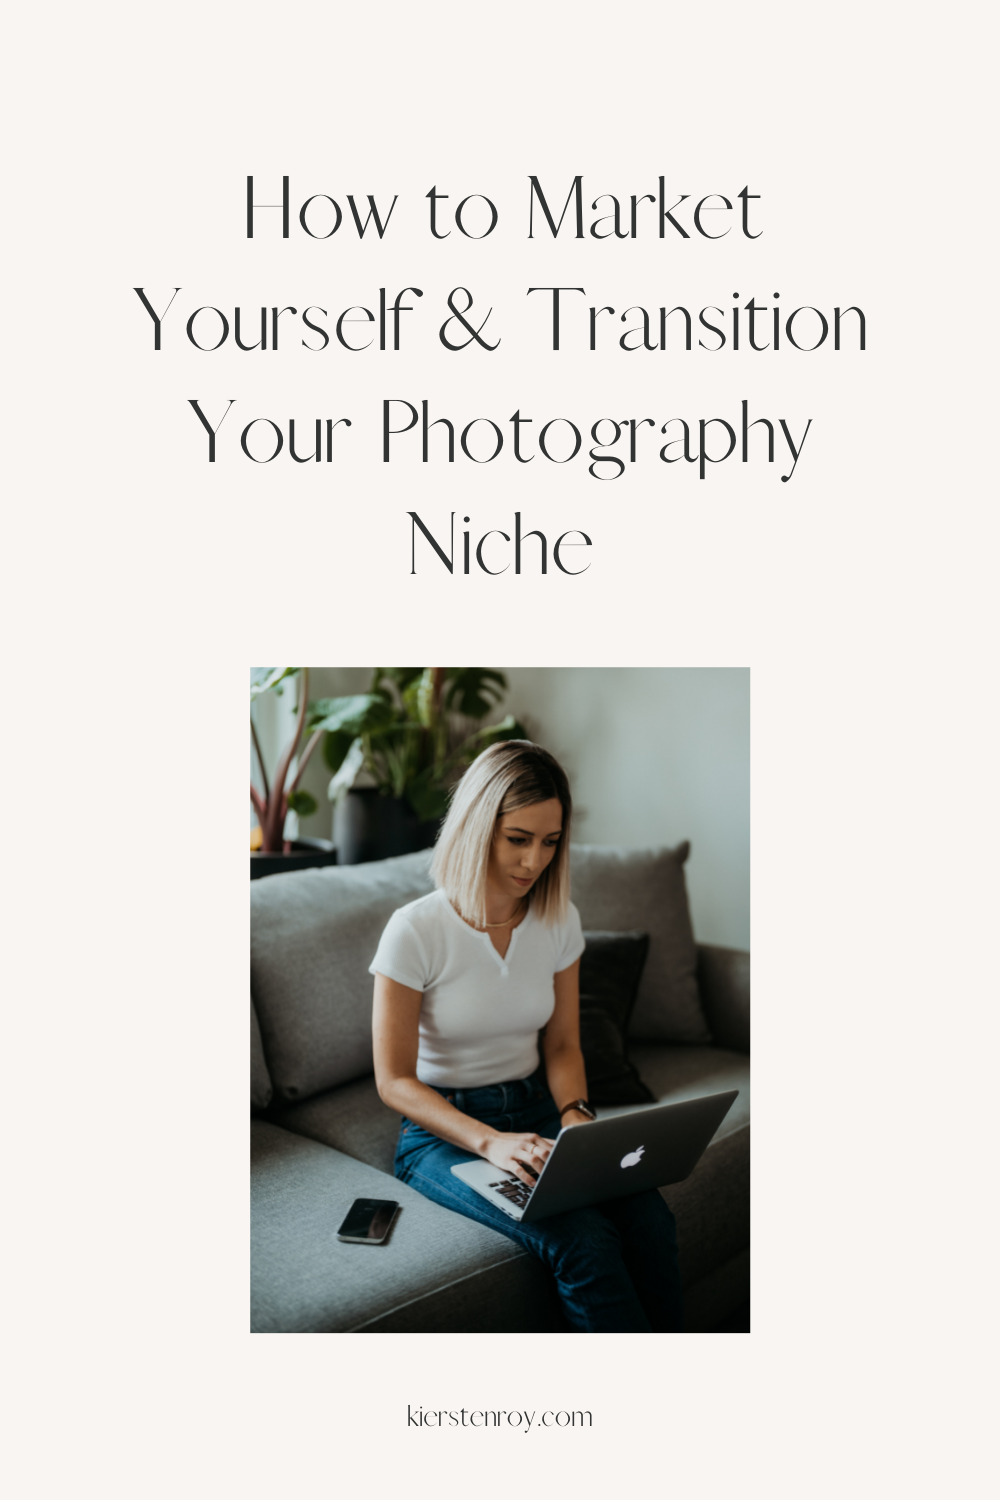 How to Market Yourself & Transition Your Photography Niche